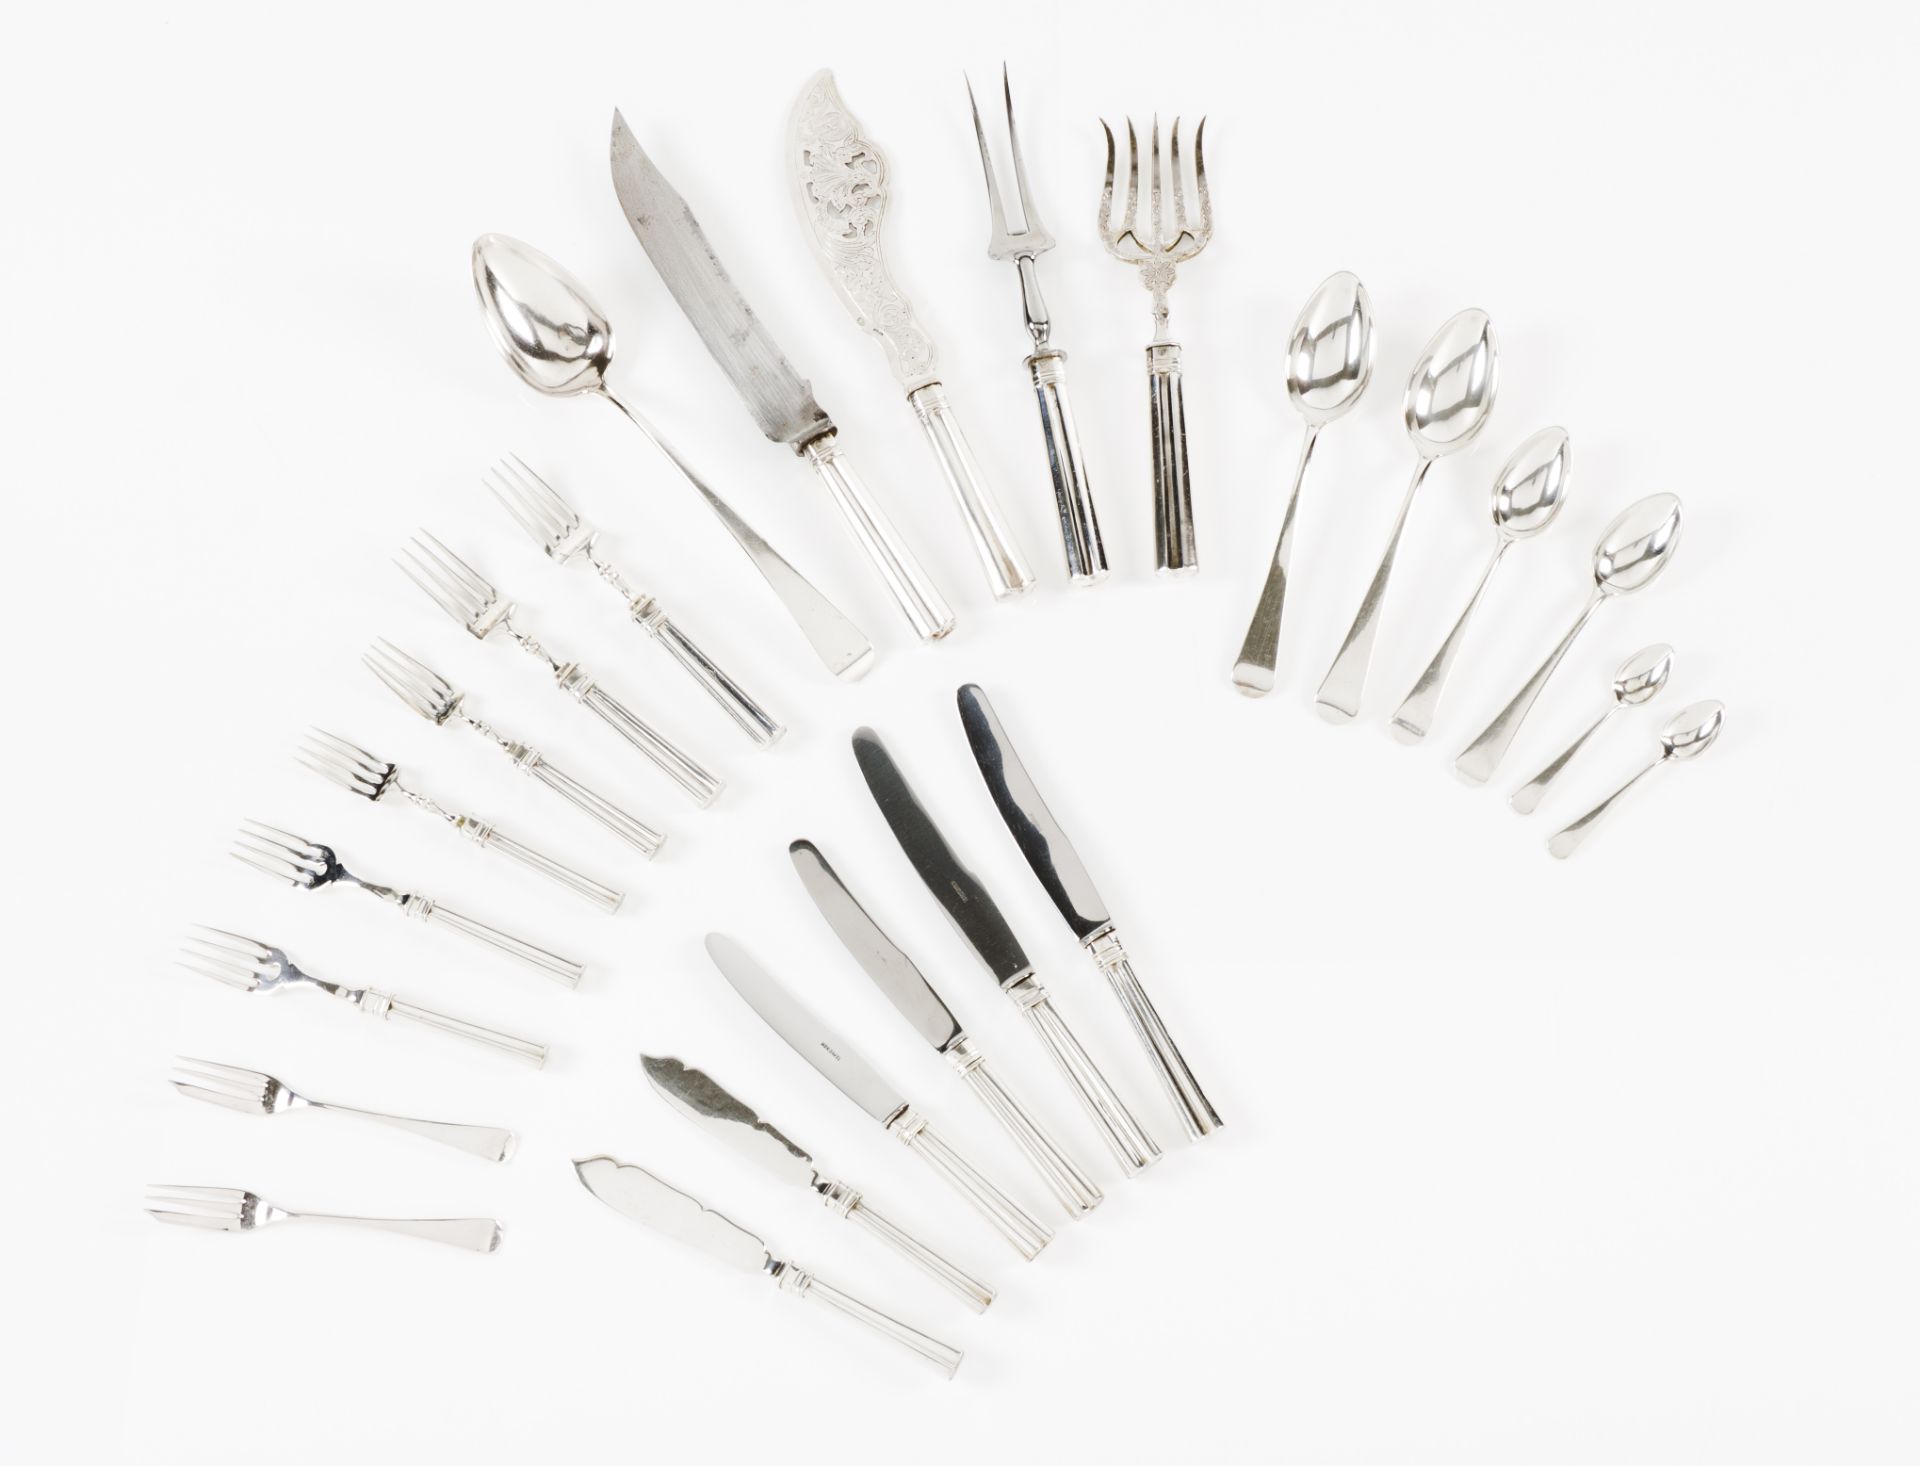 A twelve cover cutlery set Portuguese silver Fluted decoration known as "meia-cana" Soup spoons,